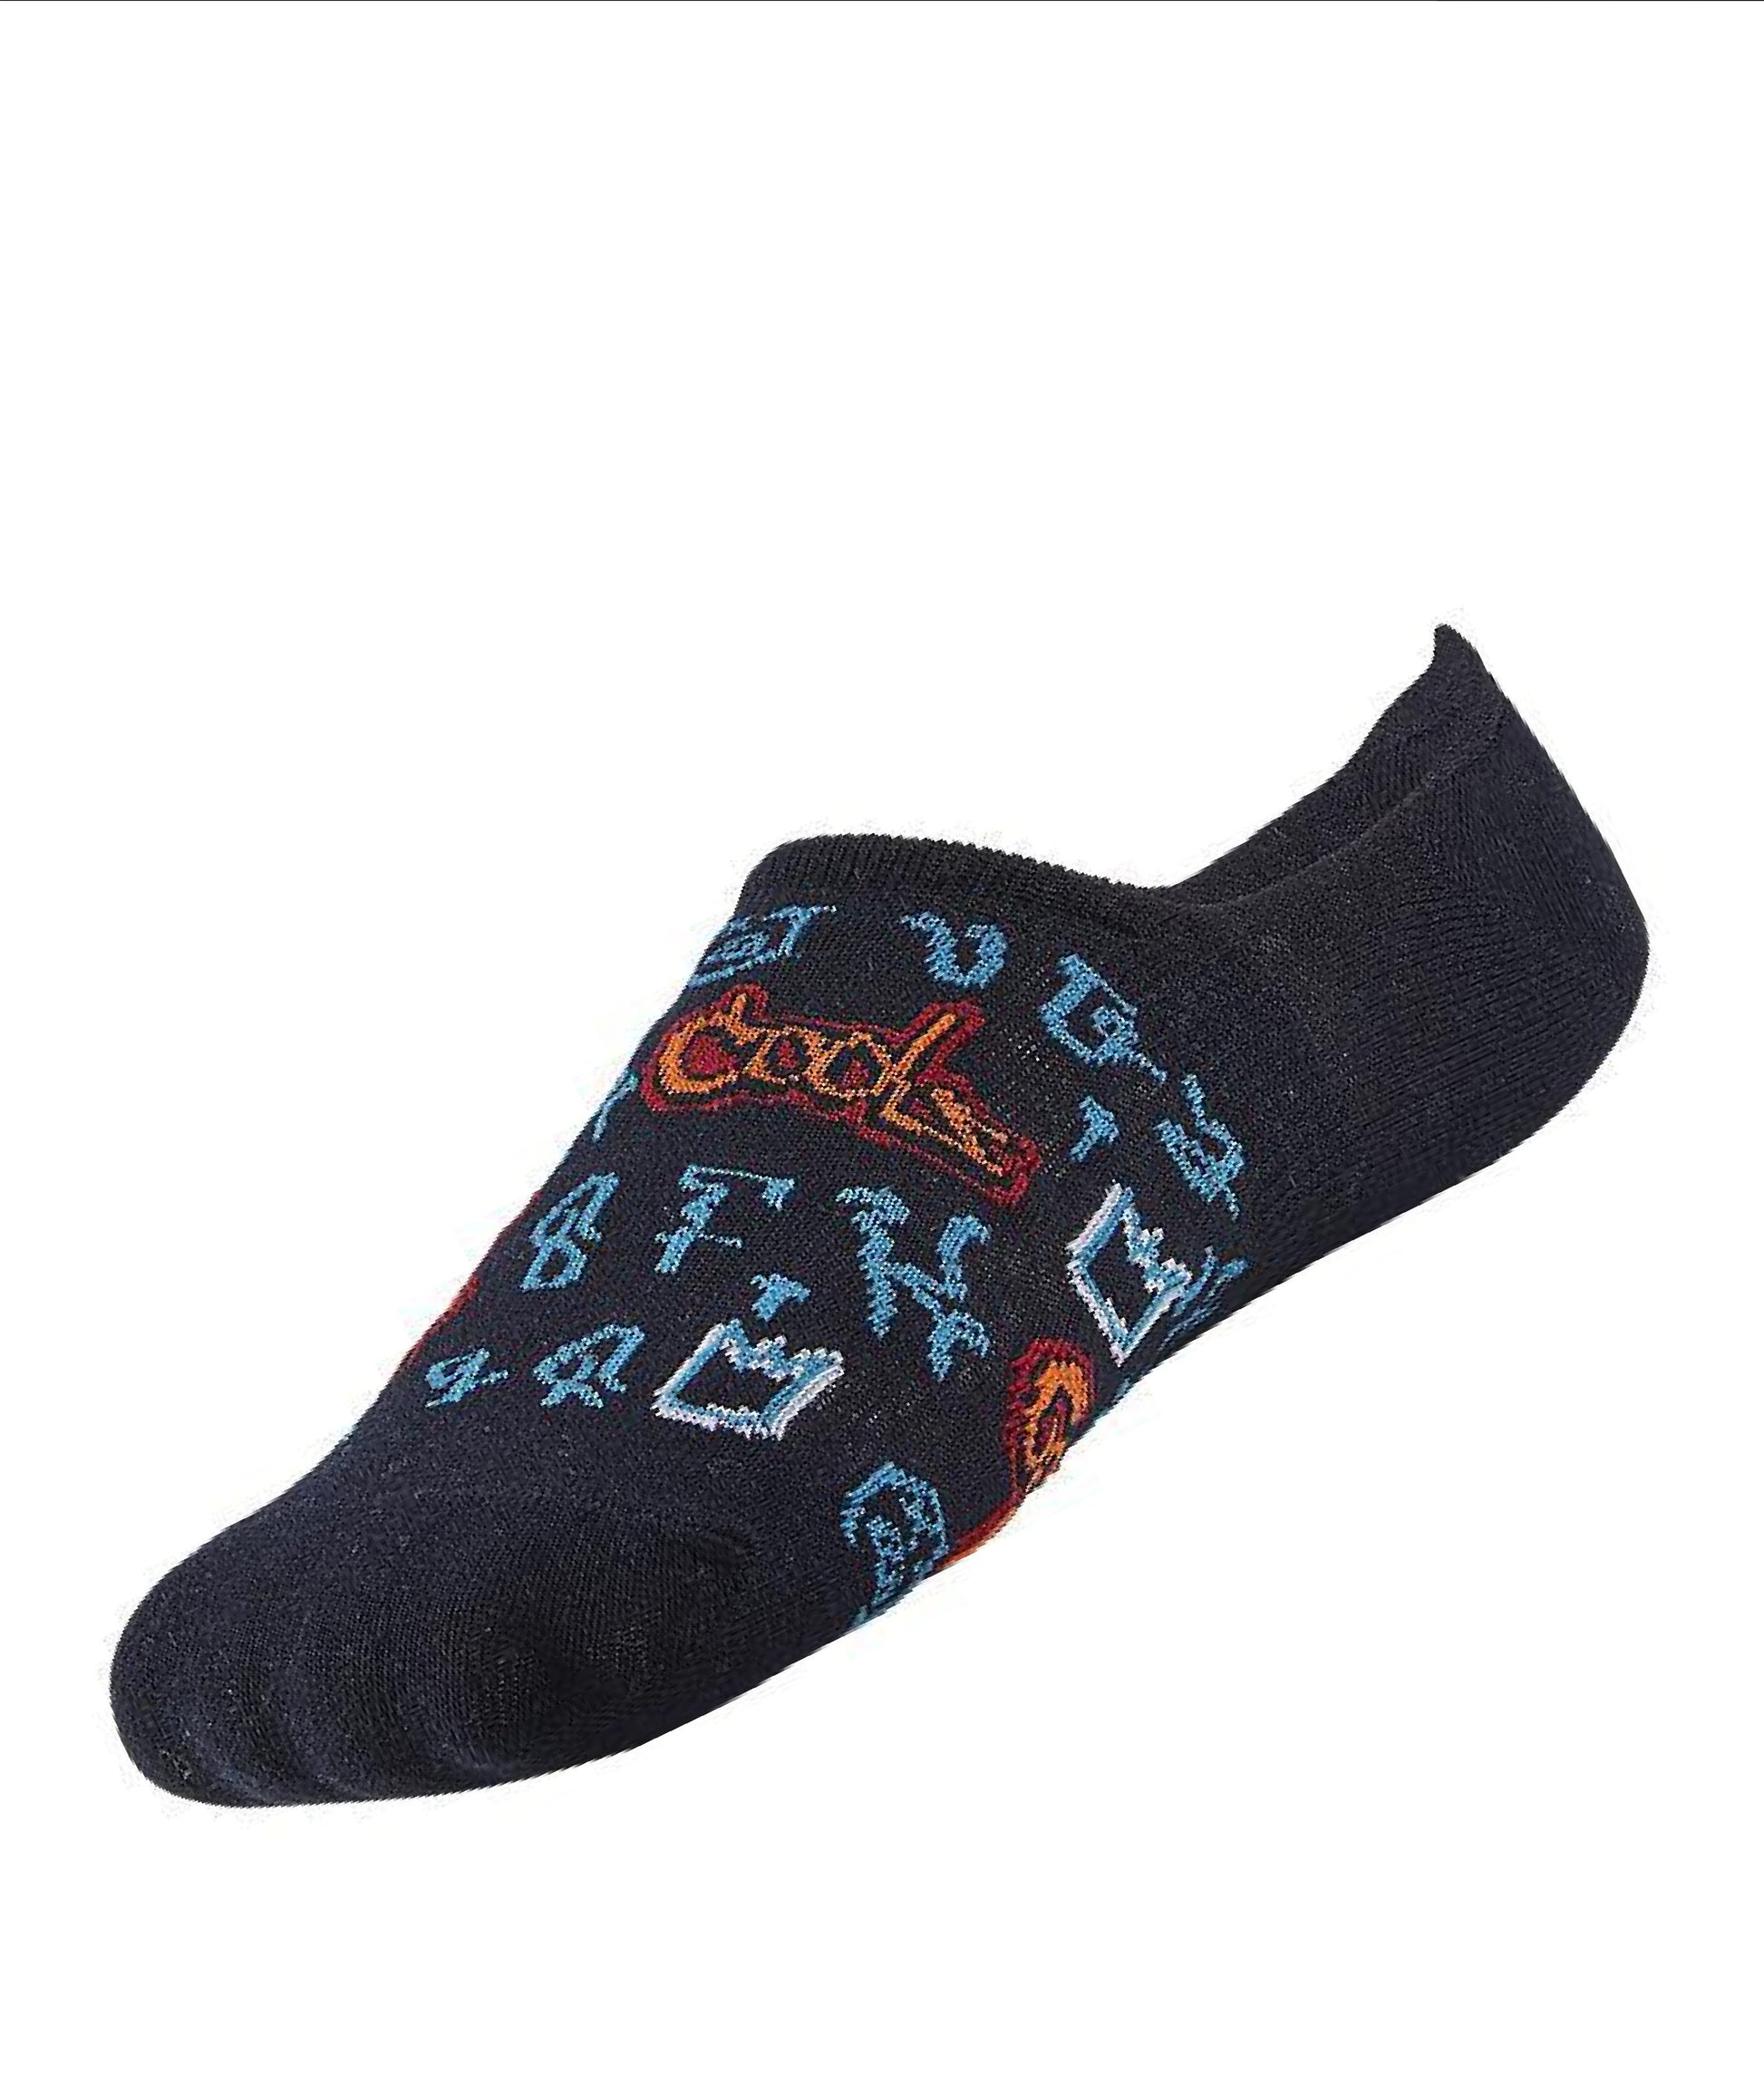 Ysabel Mora Tags Low Sock - Navy low ankle cotton sneaker no show socks with a graffiti tag style pattern in light blue, red and orange. This sock has silicone inside the heel to help prevent them from slipping off.